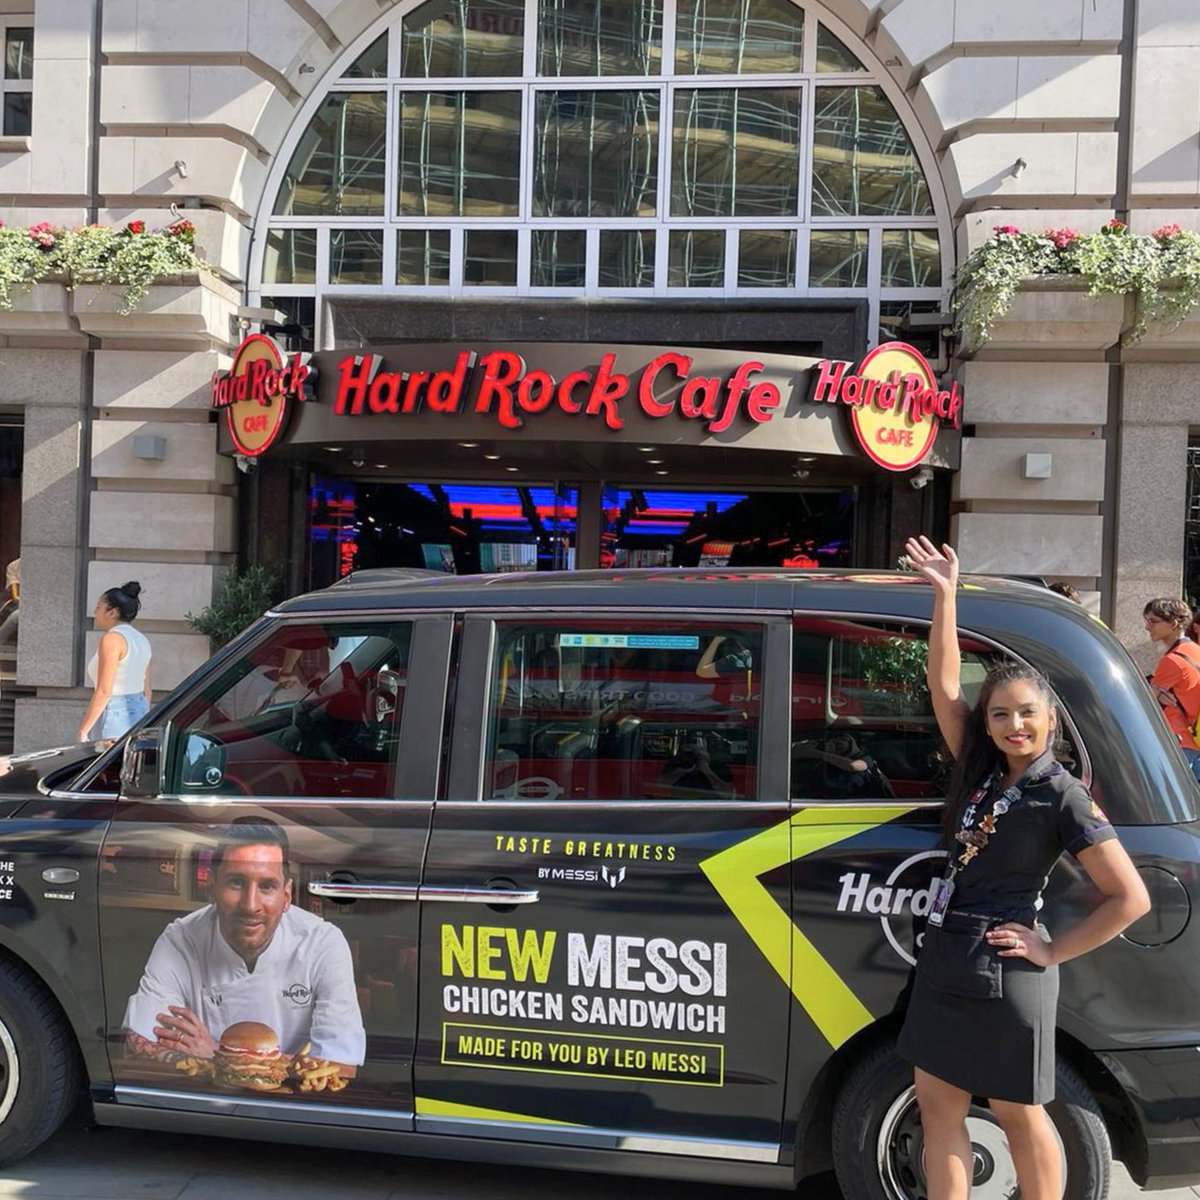 The Messi Sandwich Hype hits London! 🍔🇬🇧 Spot Messi and the #MessiSandwich gracing the iconic black cabs around London, adding a dash of soccer magic to the city's streets. ⚽

📸: @RupertHitchcox